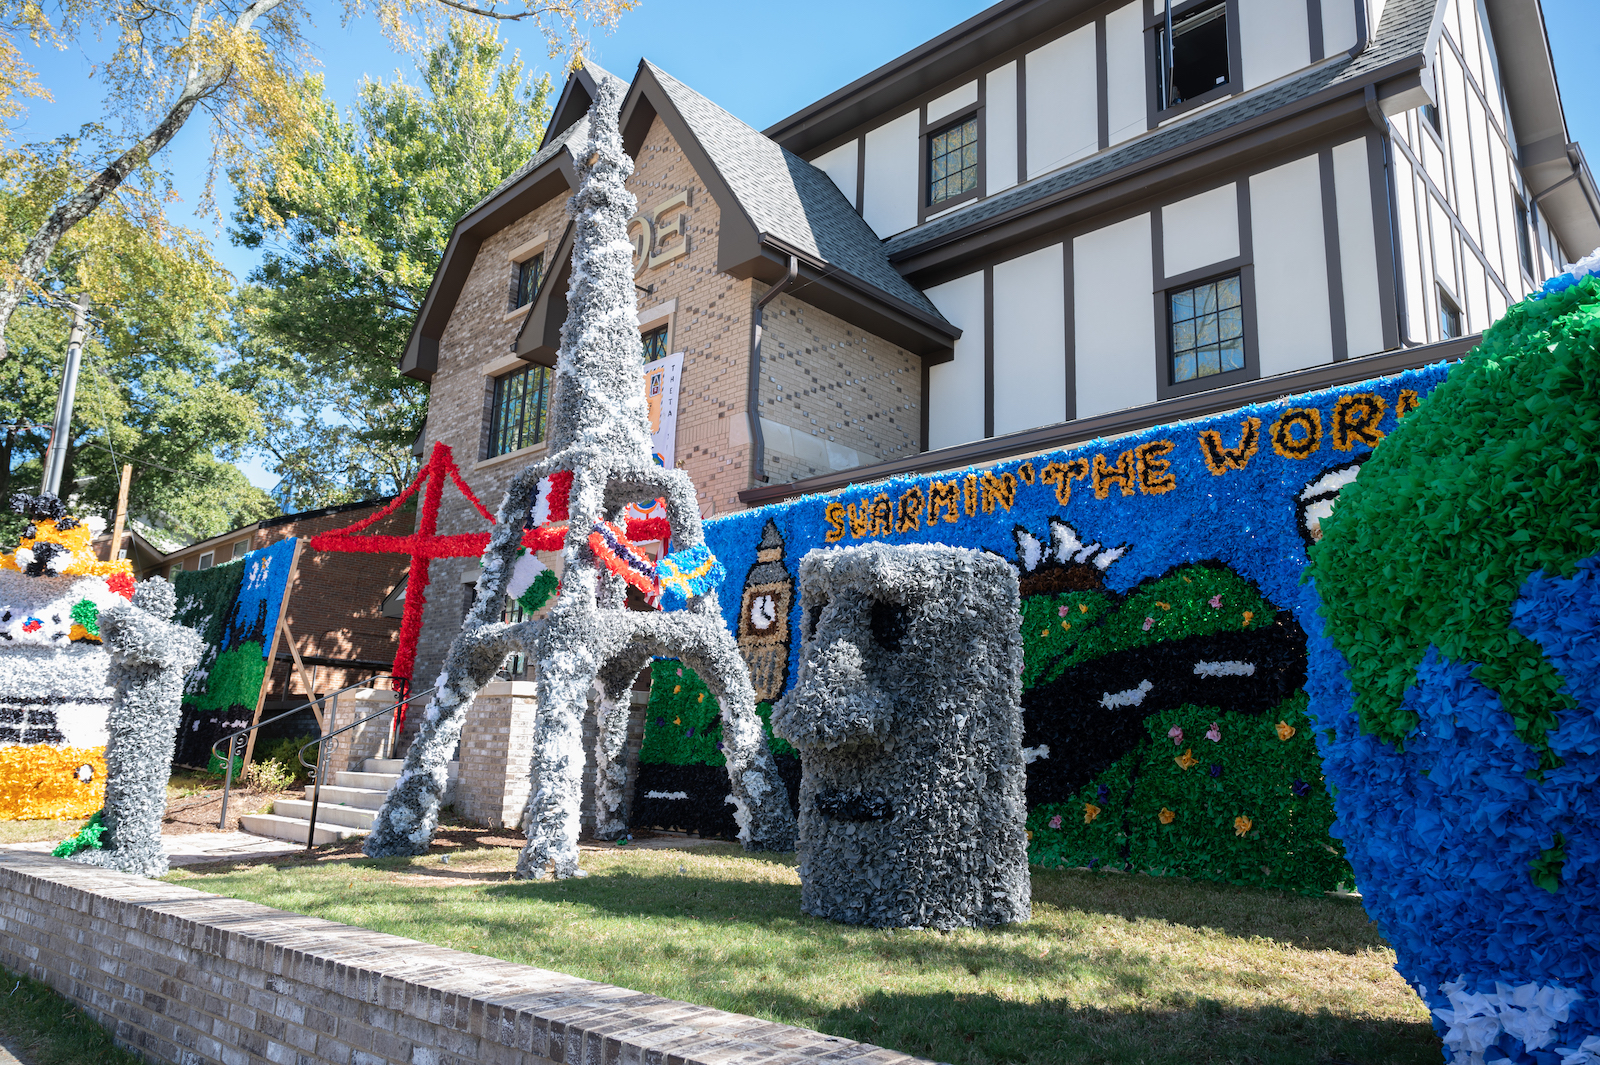 Homecoming decorations at fraternity house